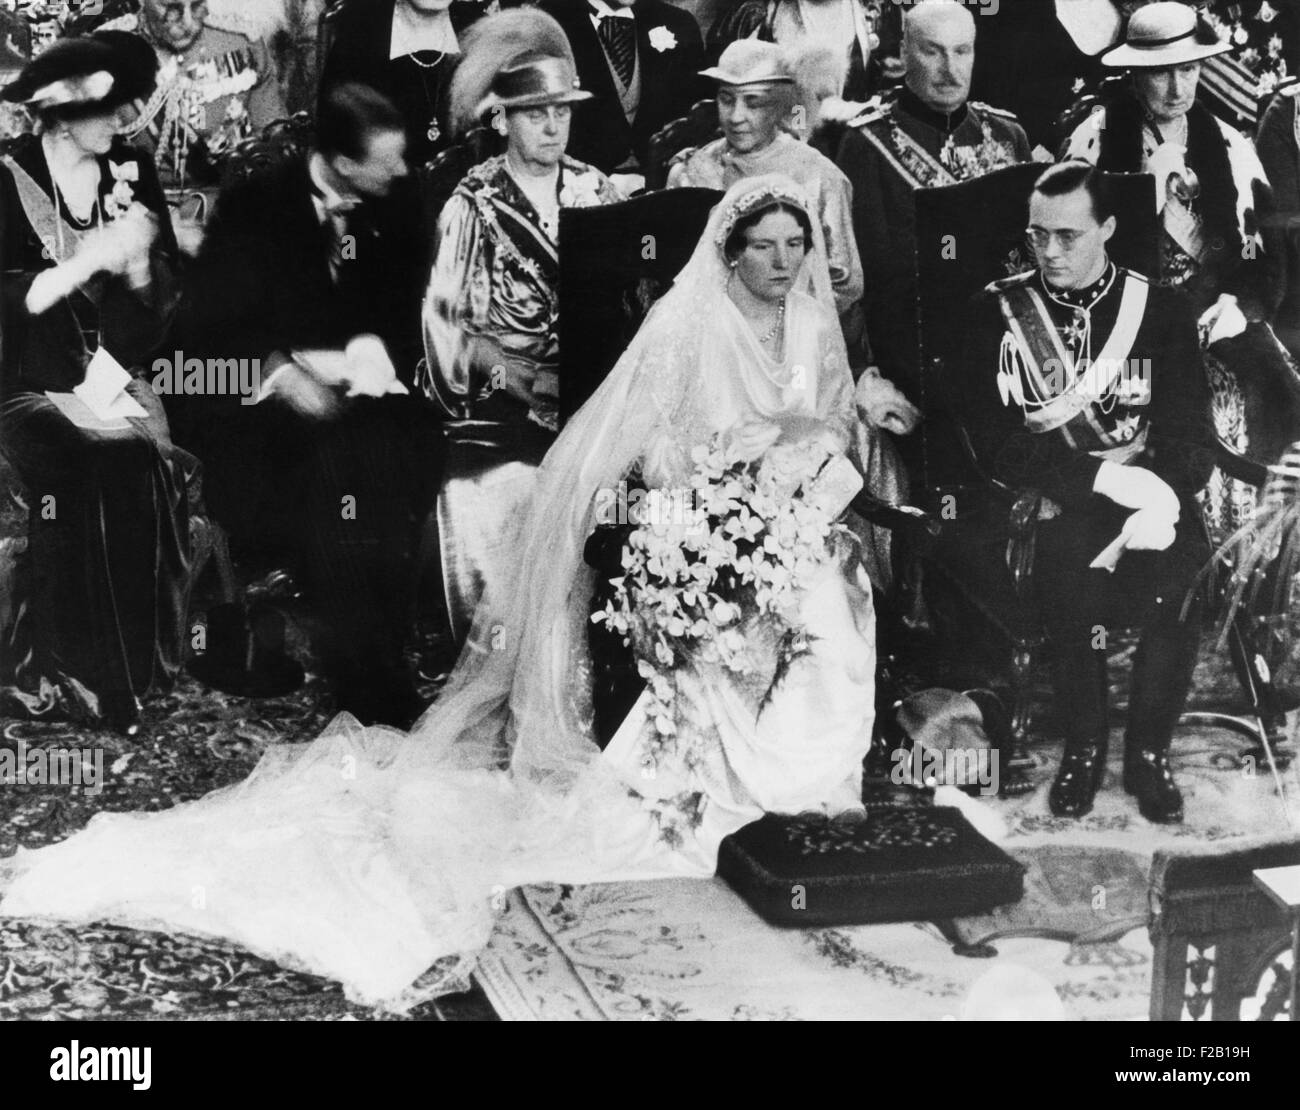 Wedding of Princess Juliana of Holland, and her husband, Prince Bernhard of Lippe-Biesterfeld. Jan, 7, 1937. Behind Juliana is Queen Wilhelmina and to the Queen's right is Princess Armgard, mother of the groom. (CSU 2015 8 639) Stock Photo